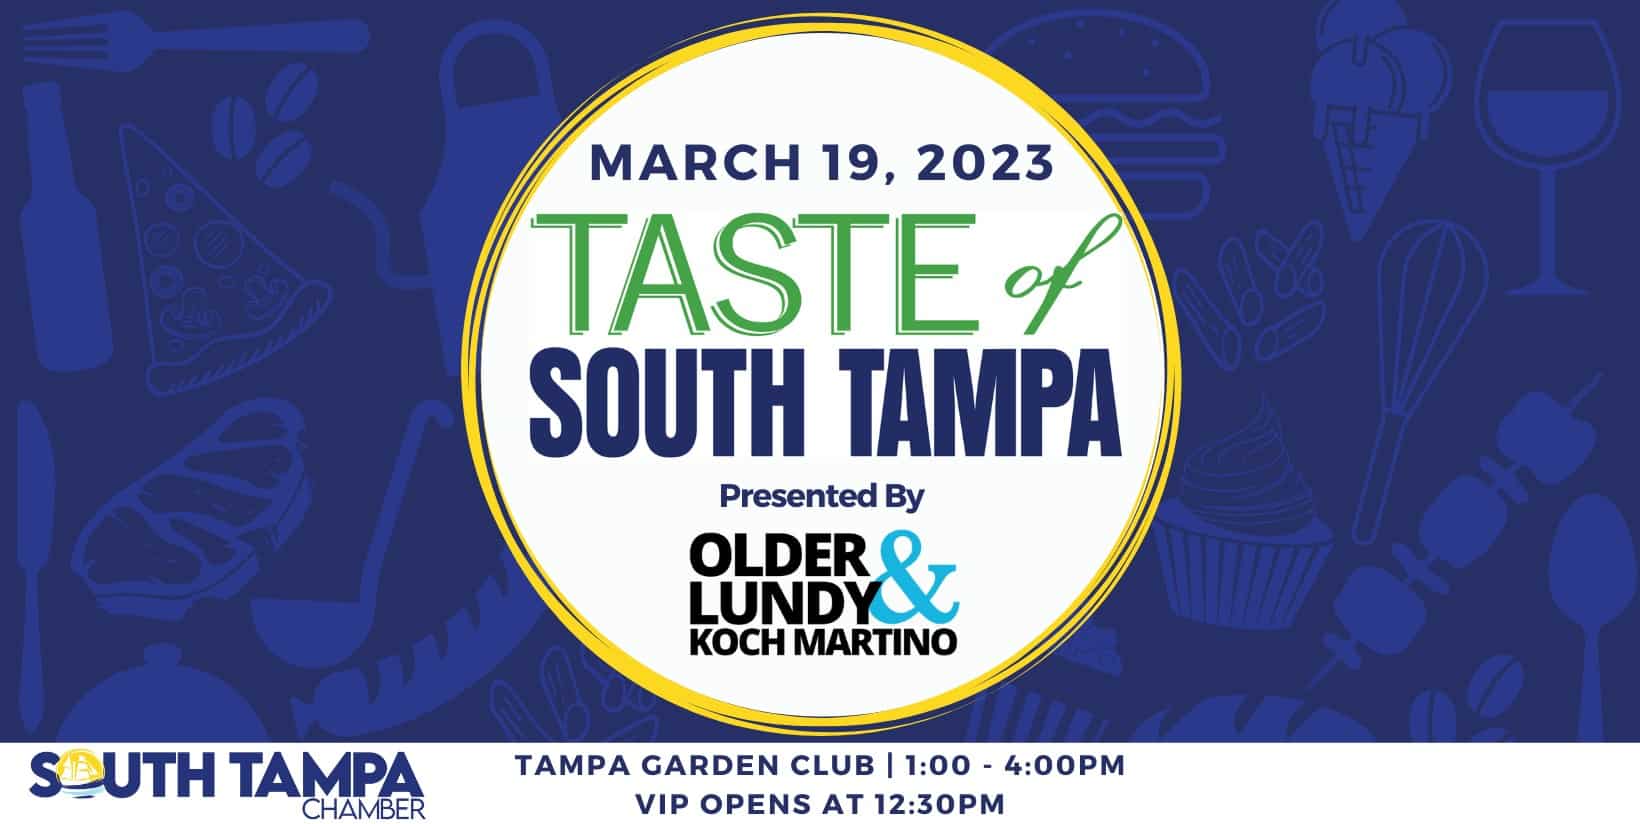 17th Annual Taste of South Tampa